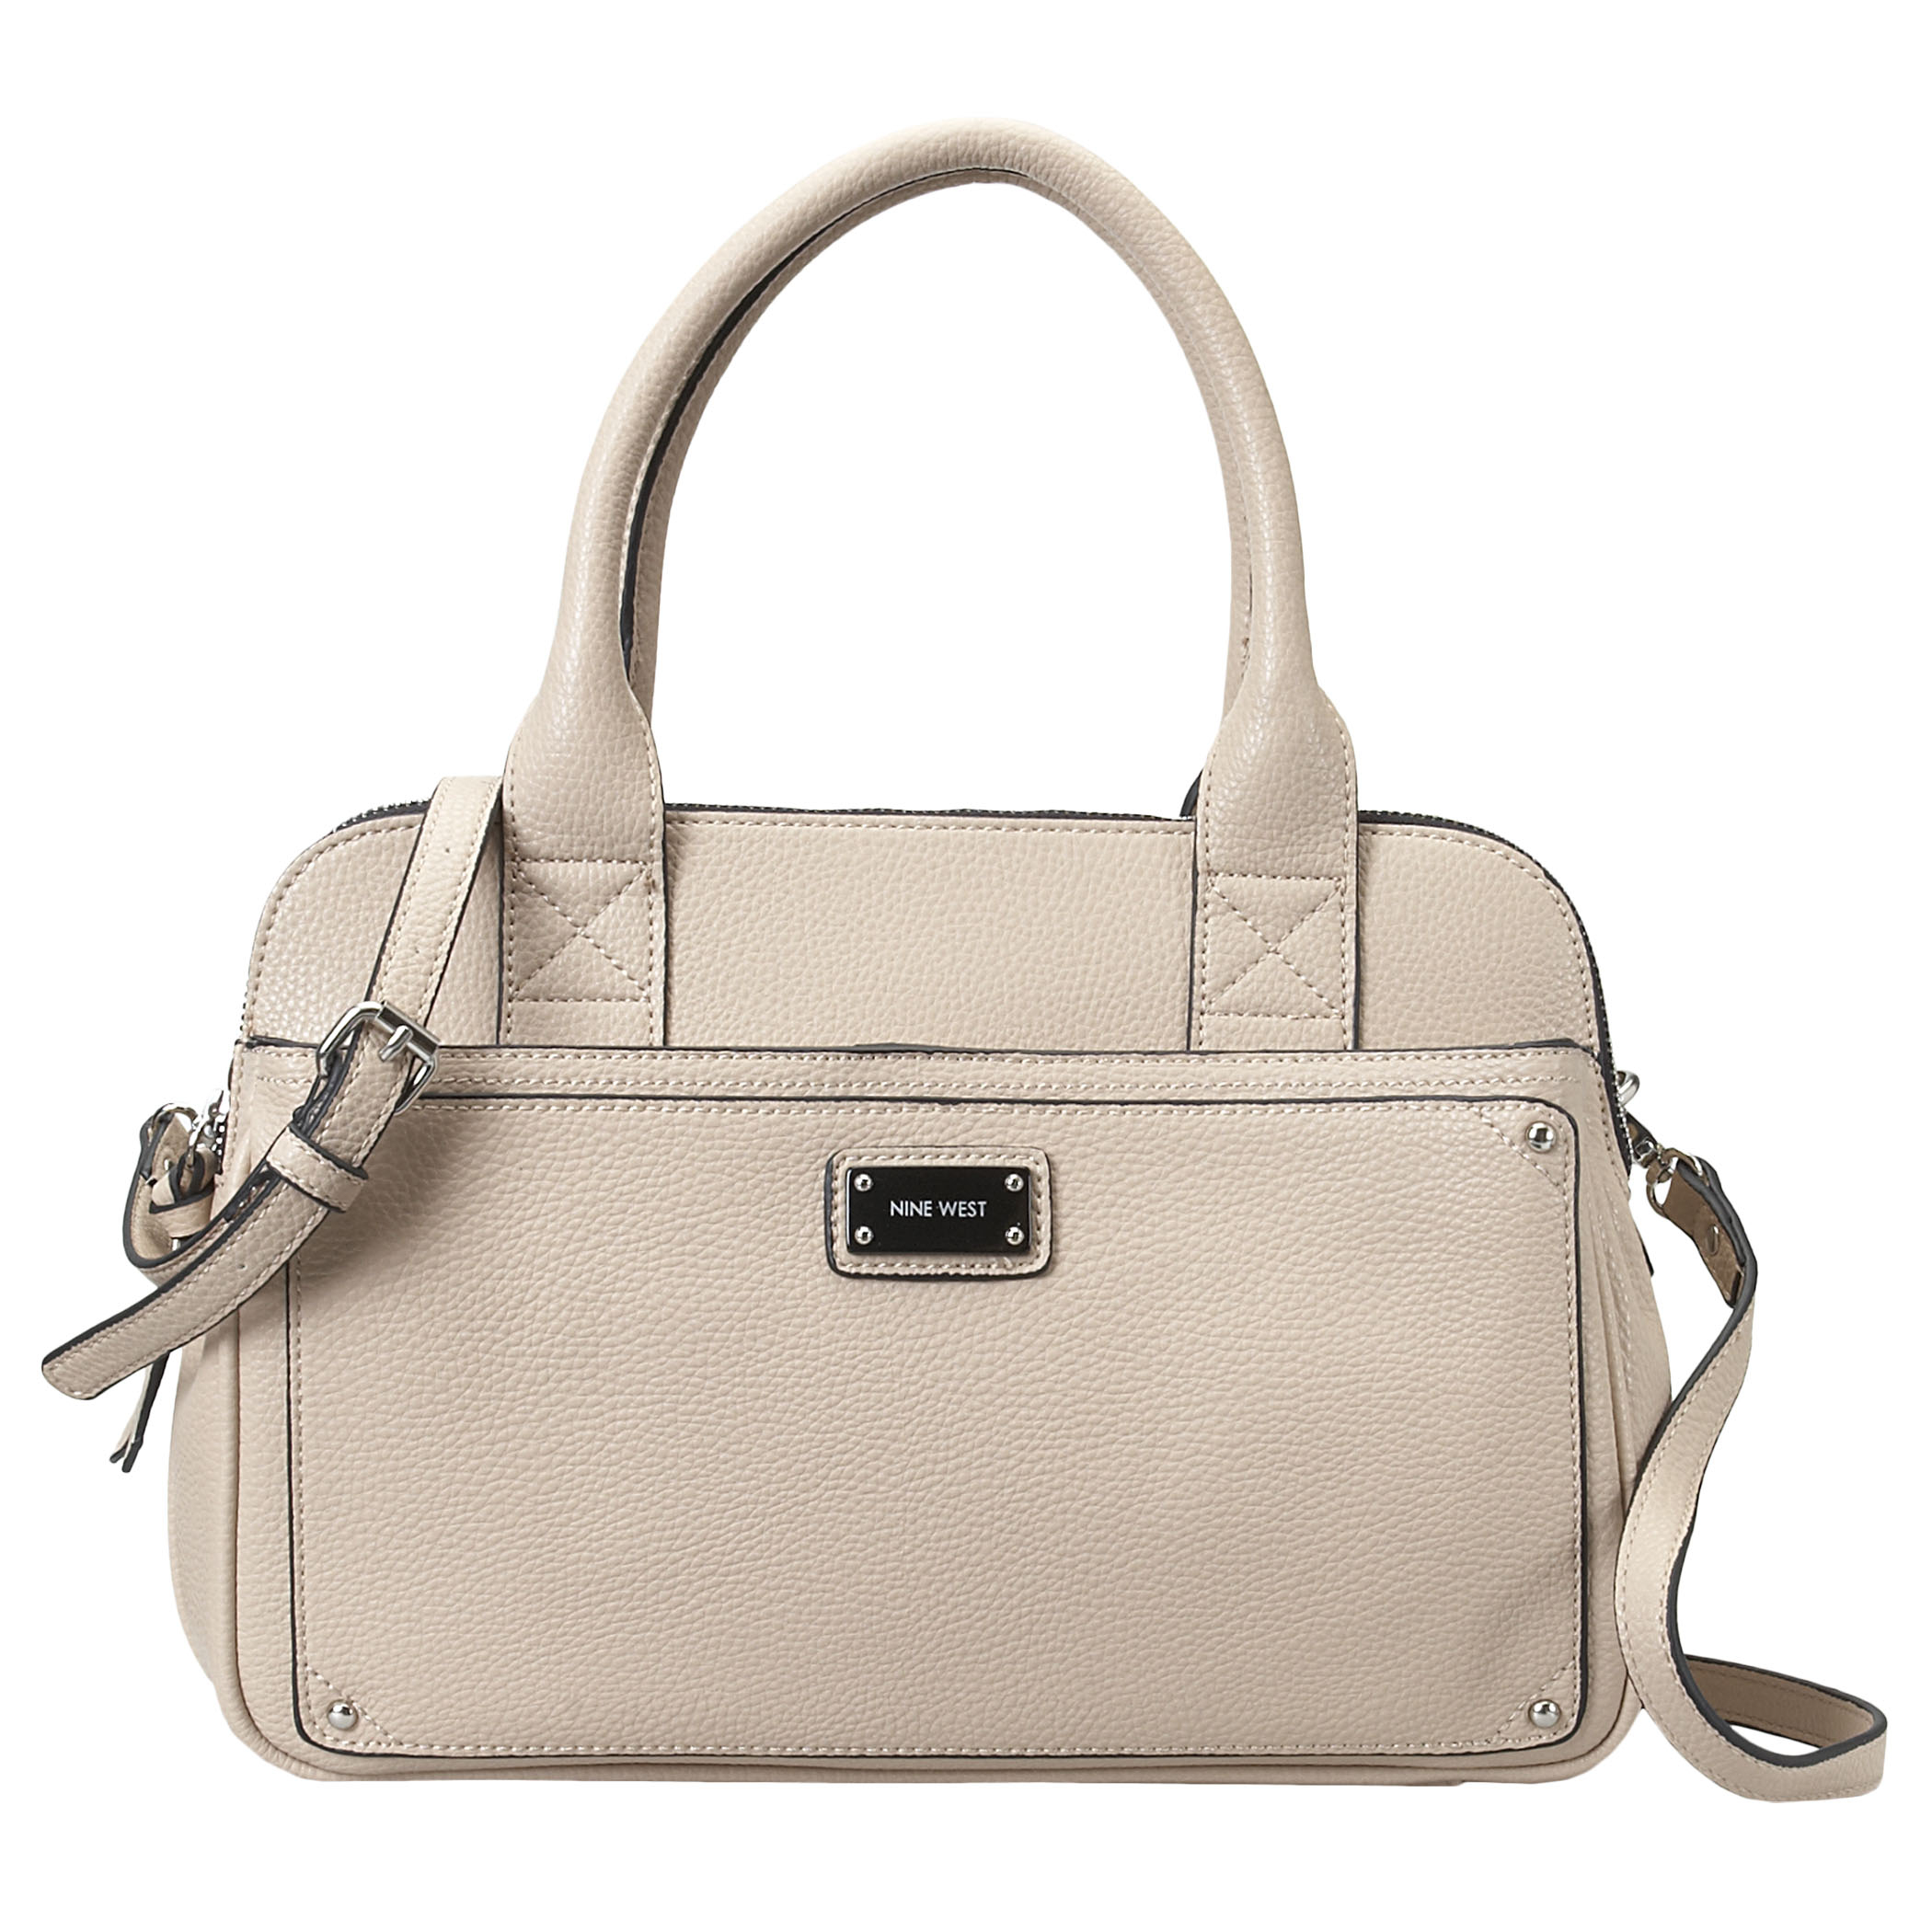 Lyst - Nine West Double Vision Satchel in Natural